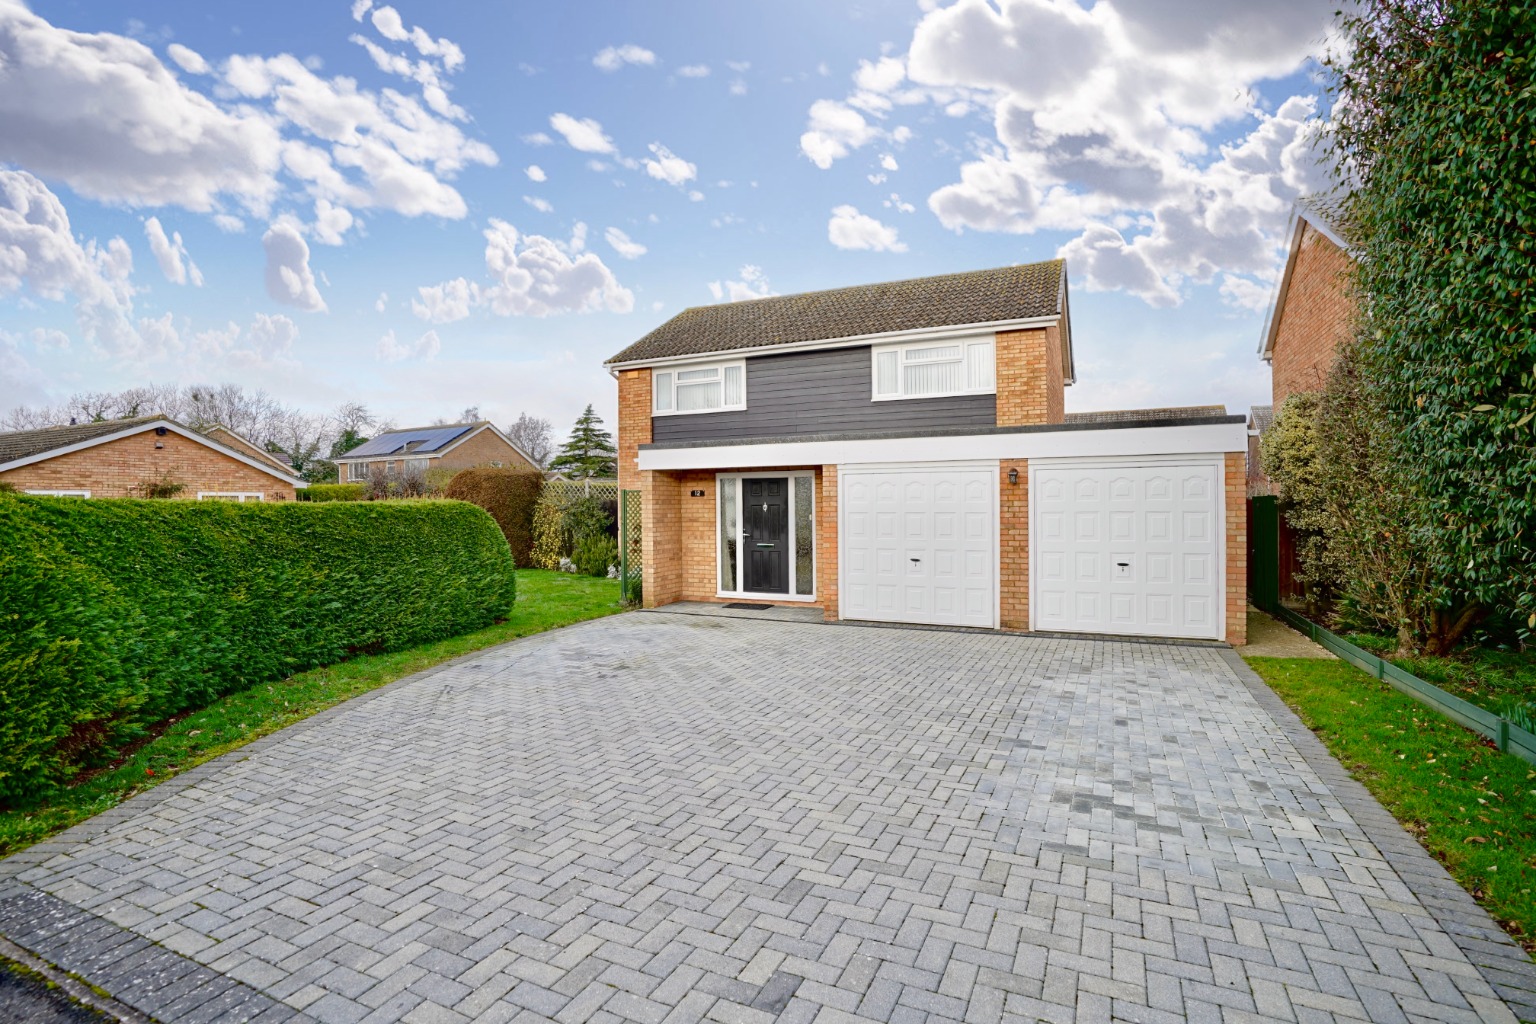 4 bed detached house for sale in Browning Drive, St. Neots, PE19